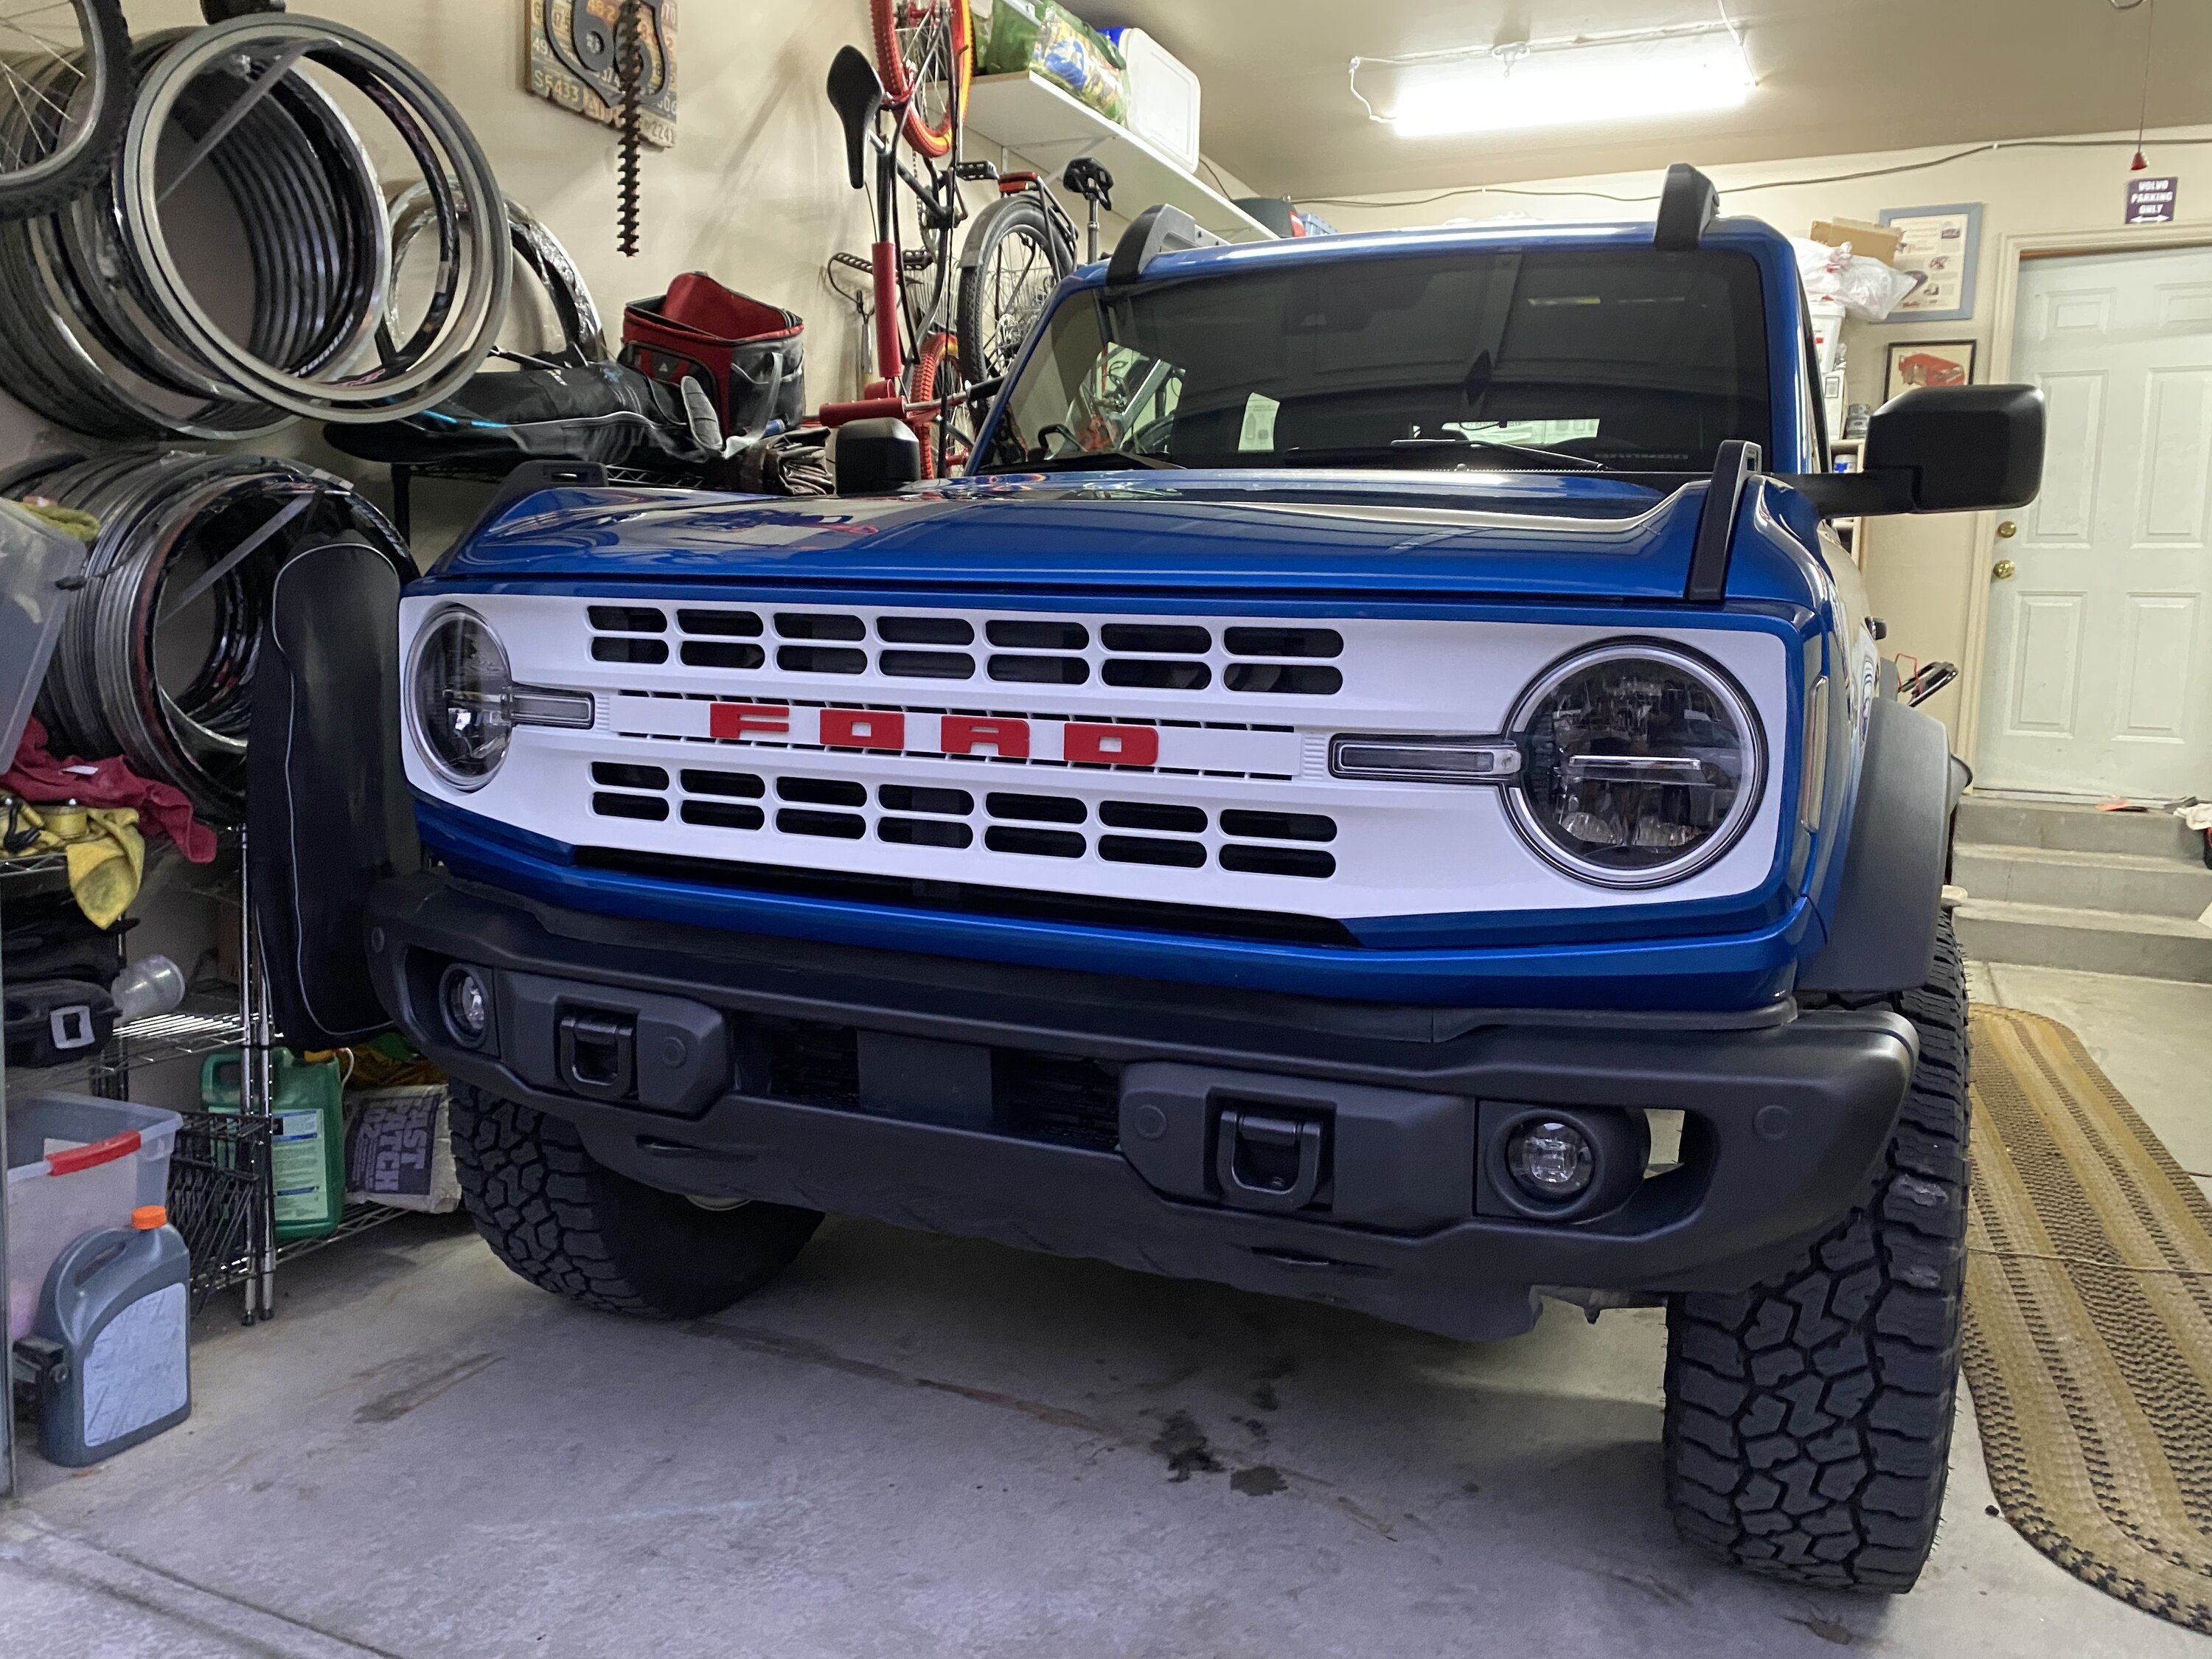 Ford Bronco DIY budget Heritage Grill w/ FORD Lettering 9E771020-C1CF-4873-A8C6-E7FDC3A60142